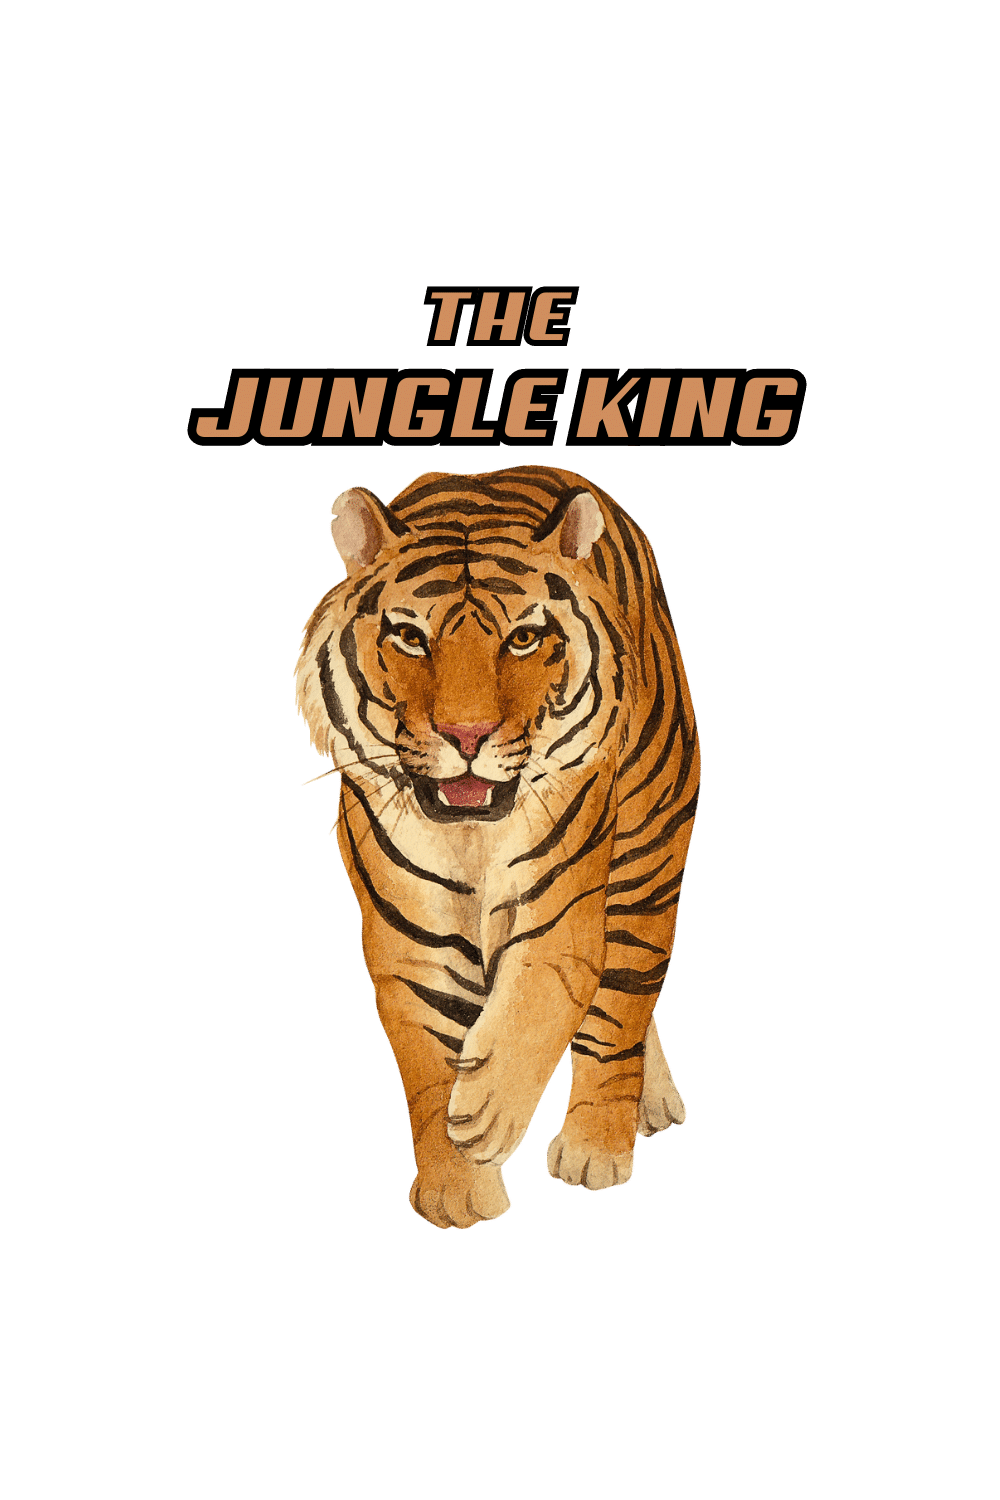 THE JUNGLE KING pinterest preview image.